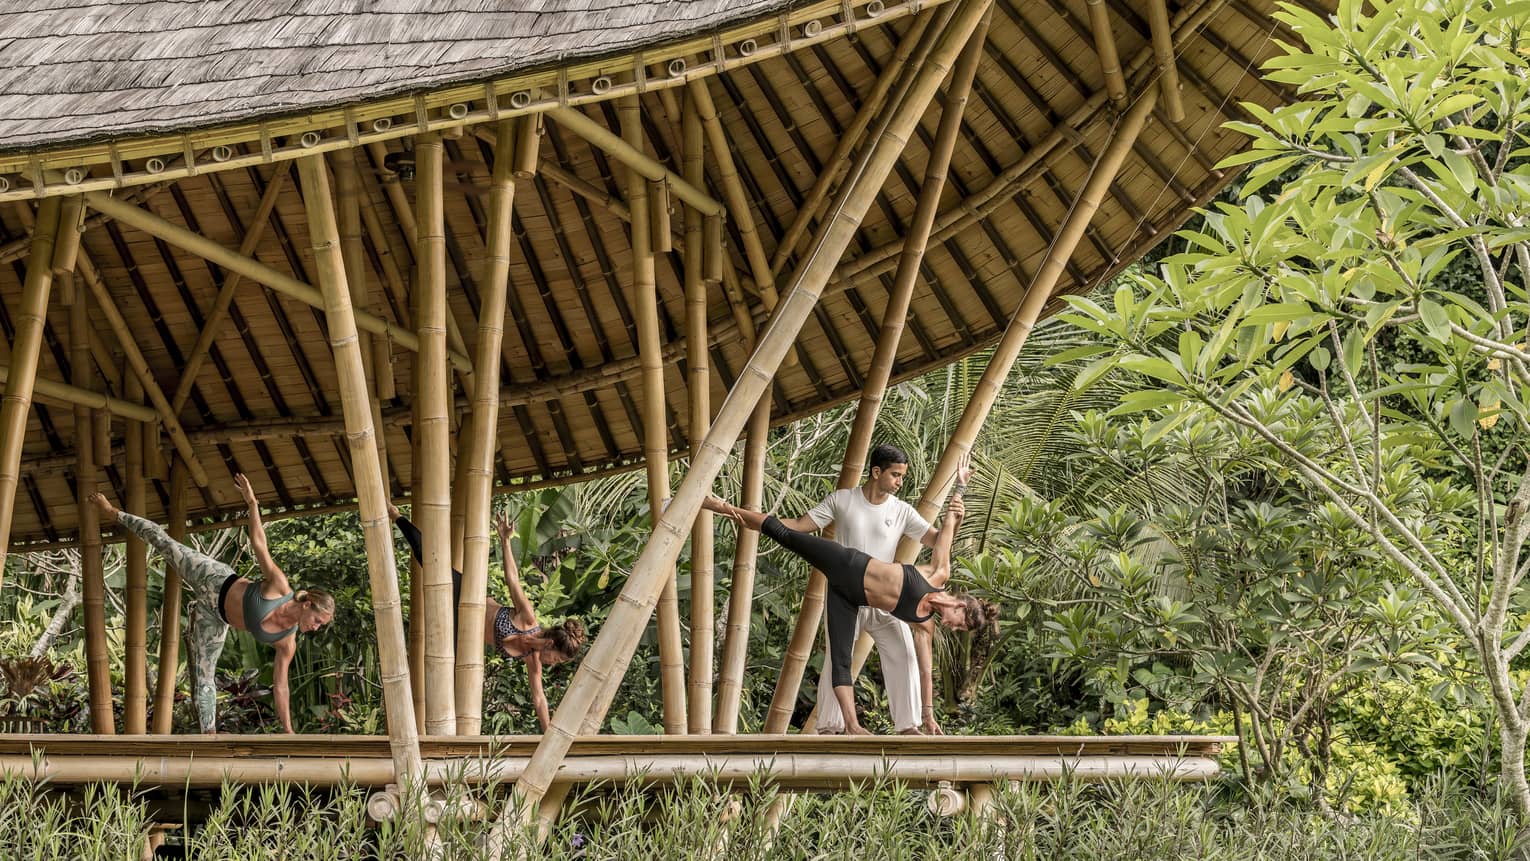 A group does yoga in a bamboo pavillion